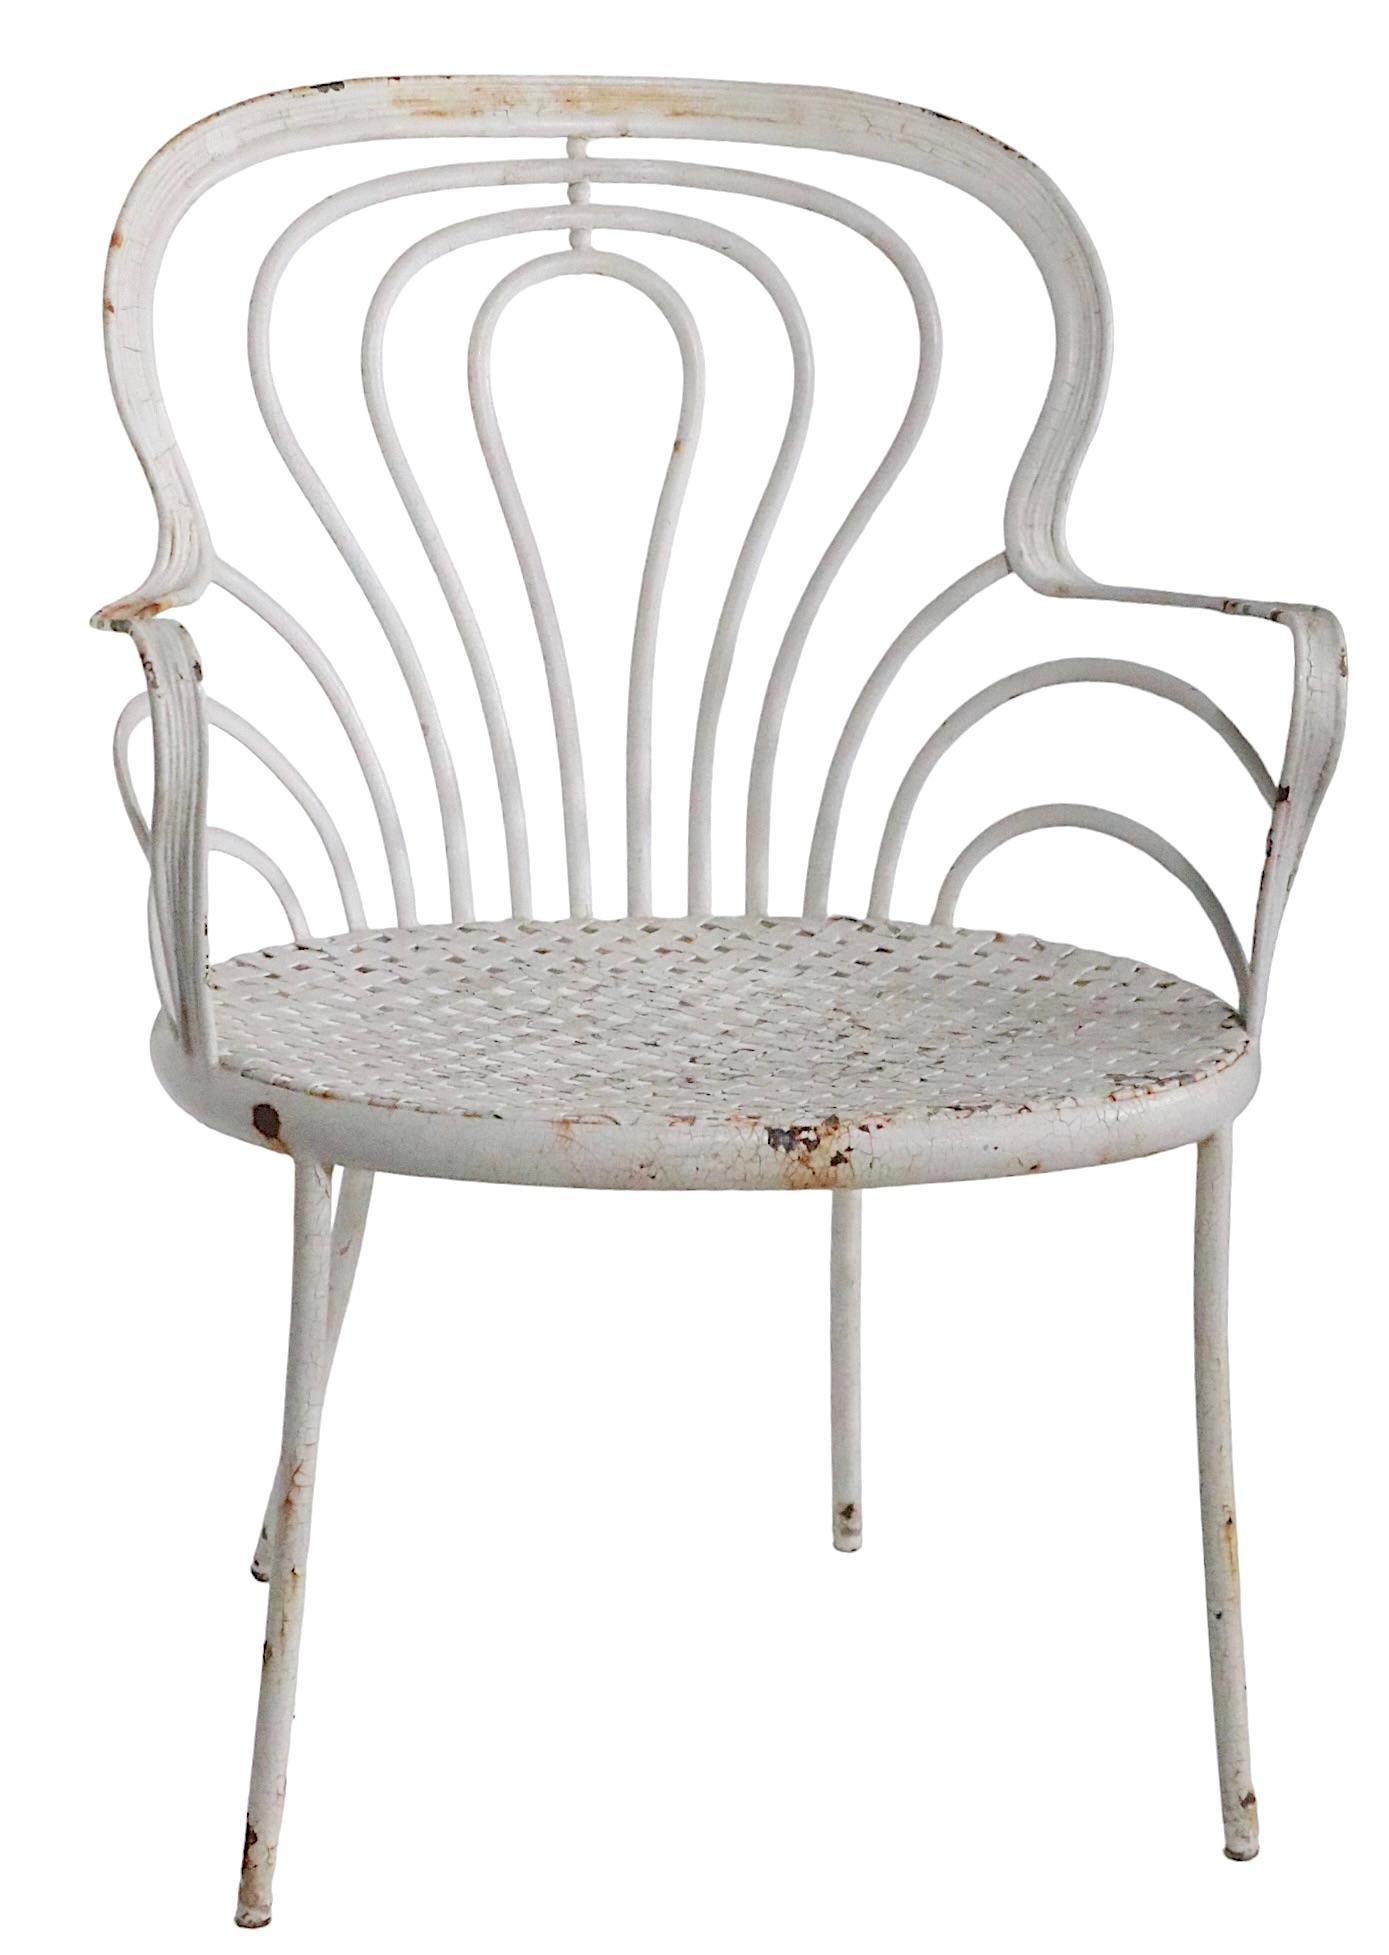 Rare example of the work of connoisseur garden furniture maker, Leinfelder. The chair features a lyrical, organic curved cab and arm rests, with a woven style seat on solid iron legs. In addition to being tres chic, the chair is unexpectedly